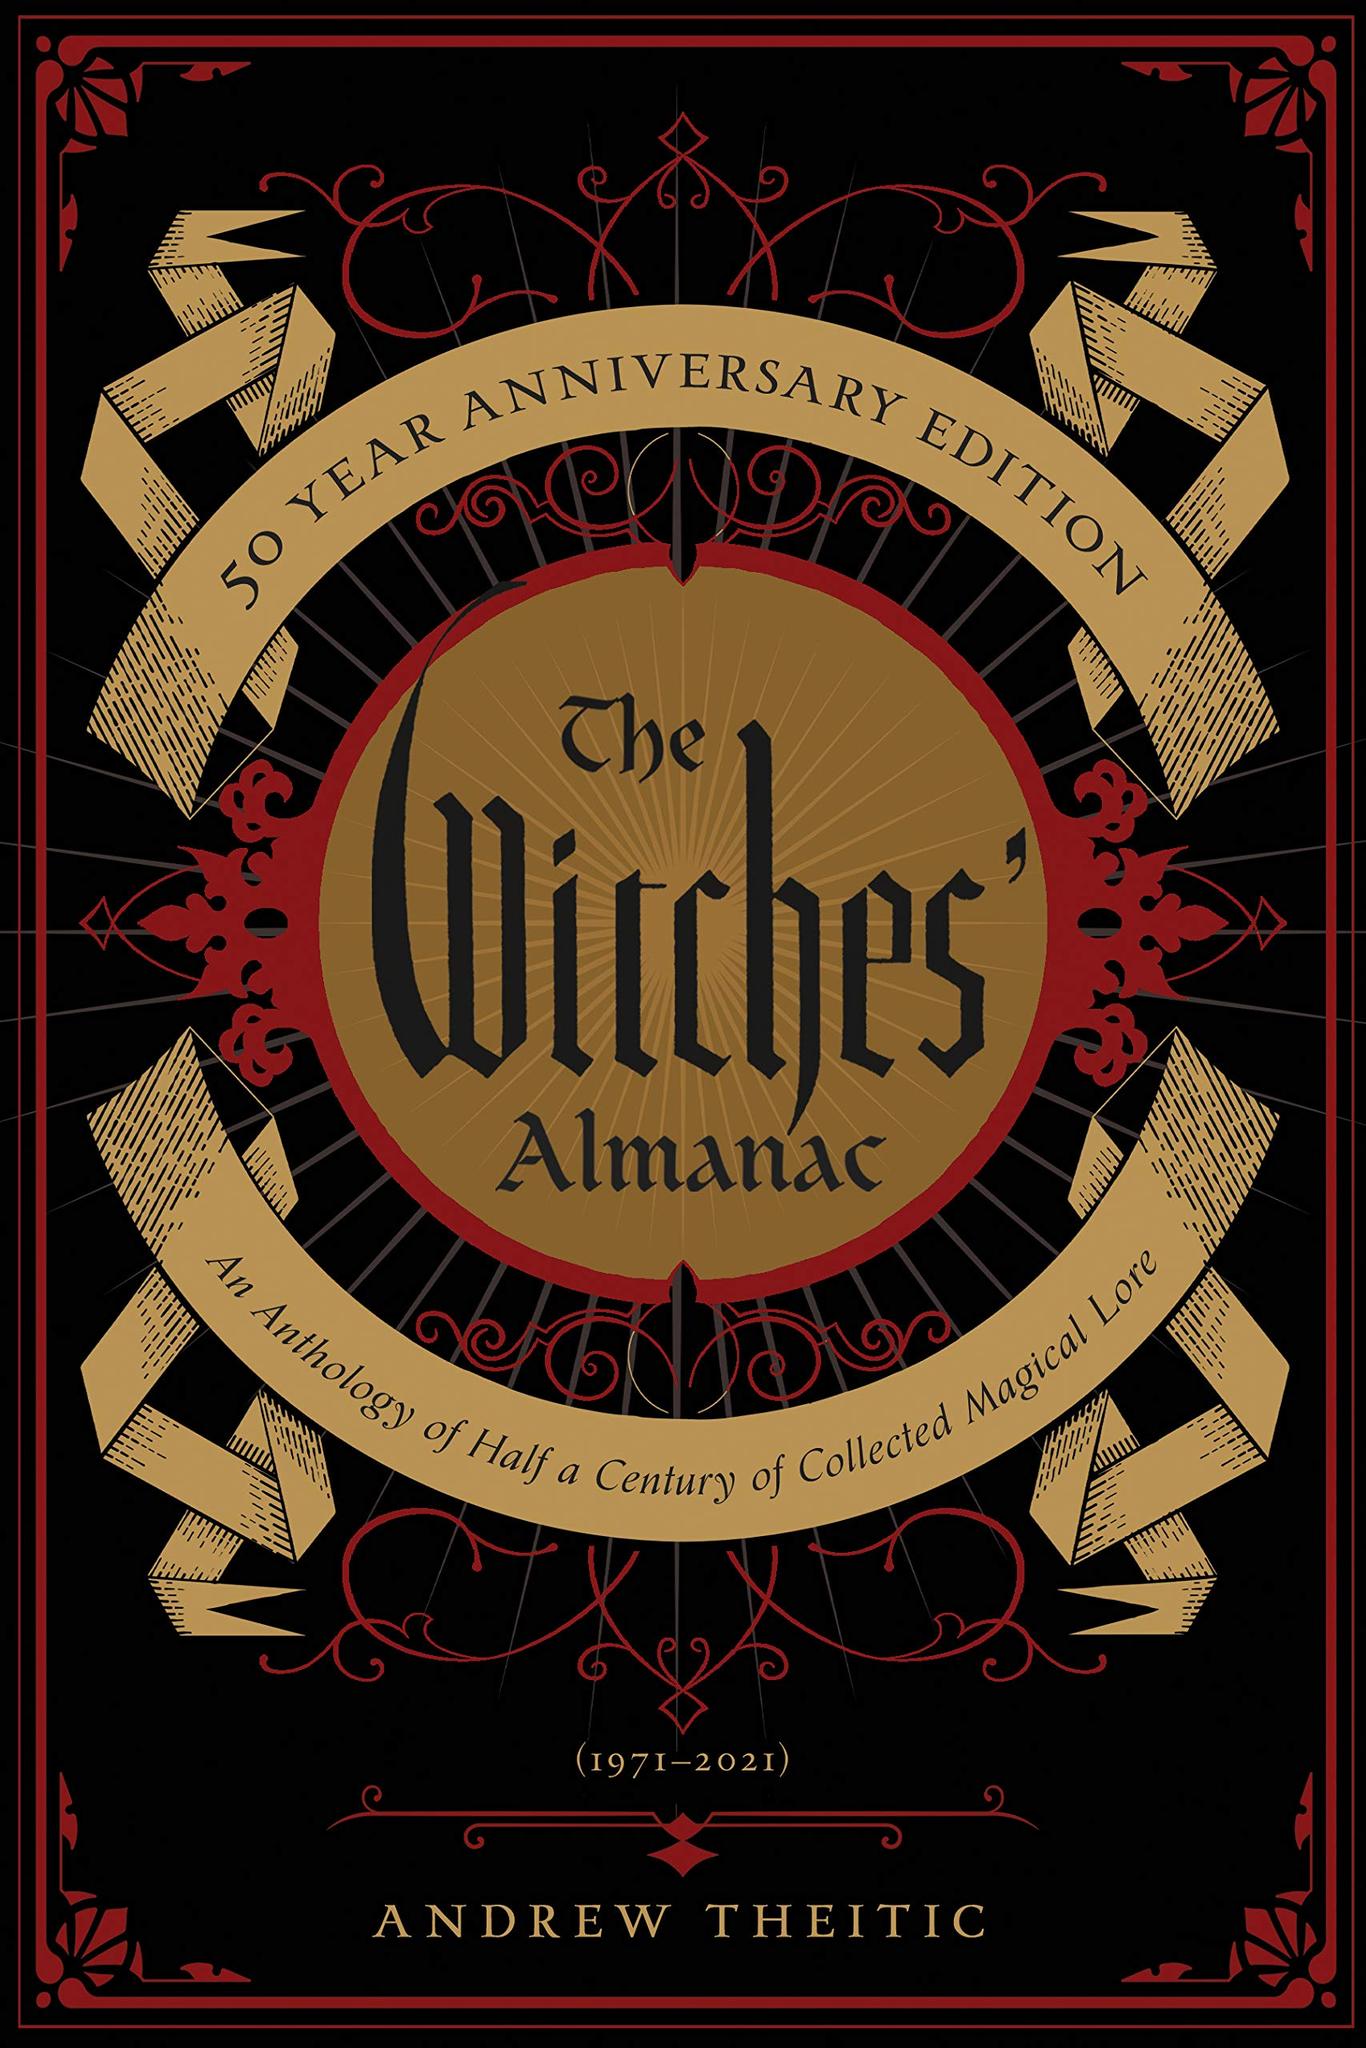 Book cover of The Witches' Almanac 50 year anniversary edition by Andrew Theitic.